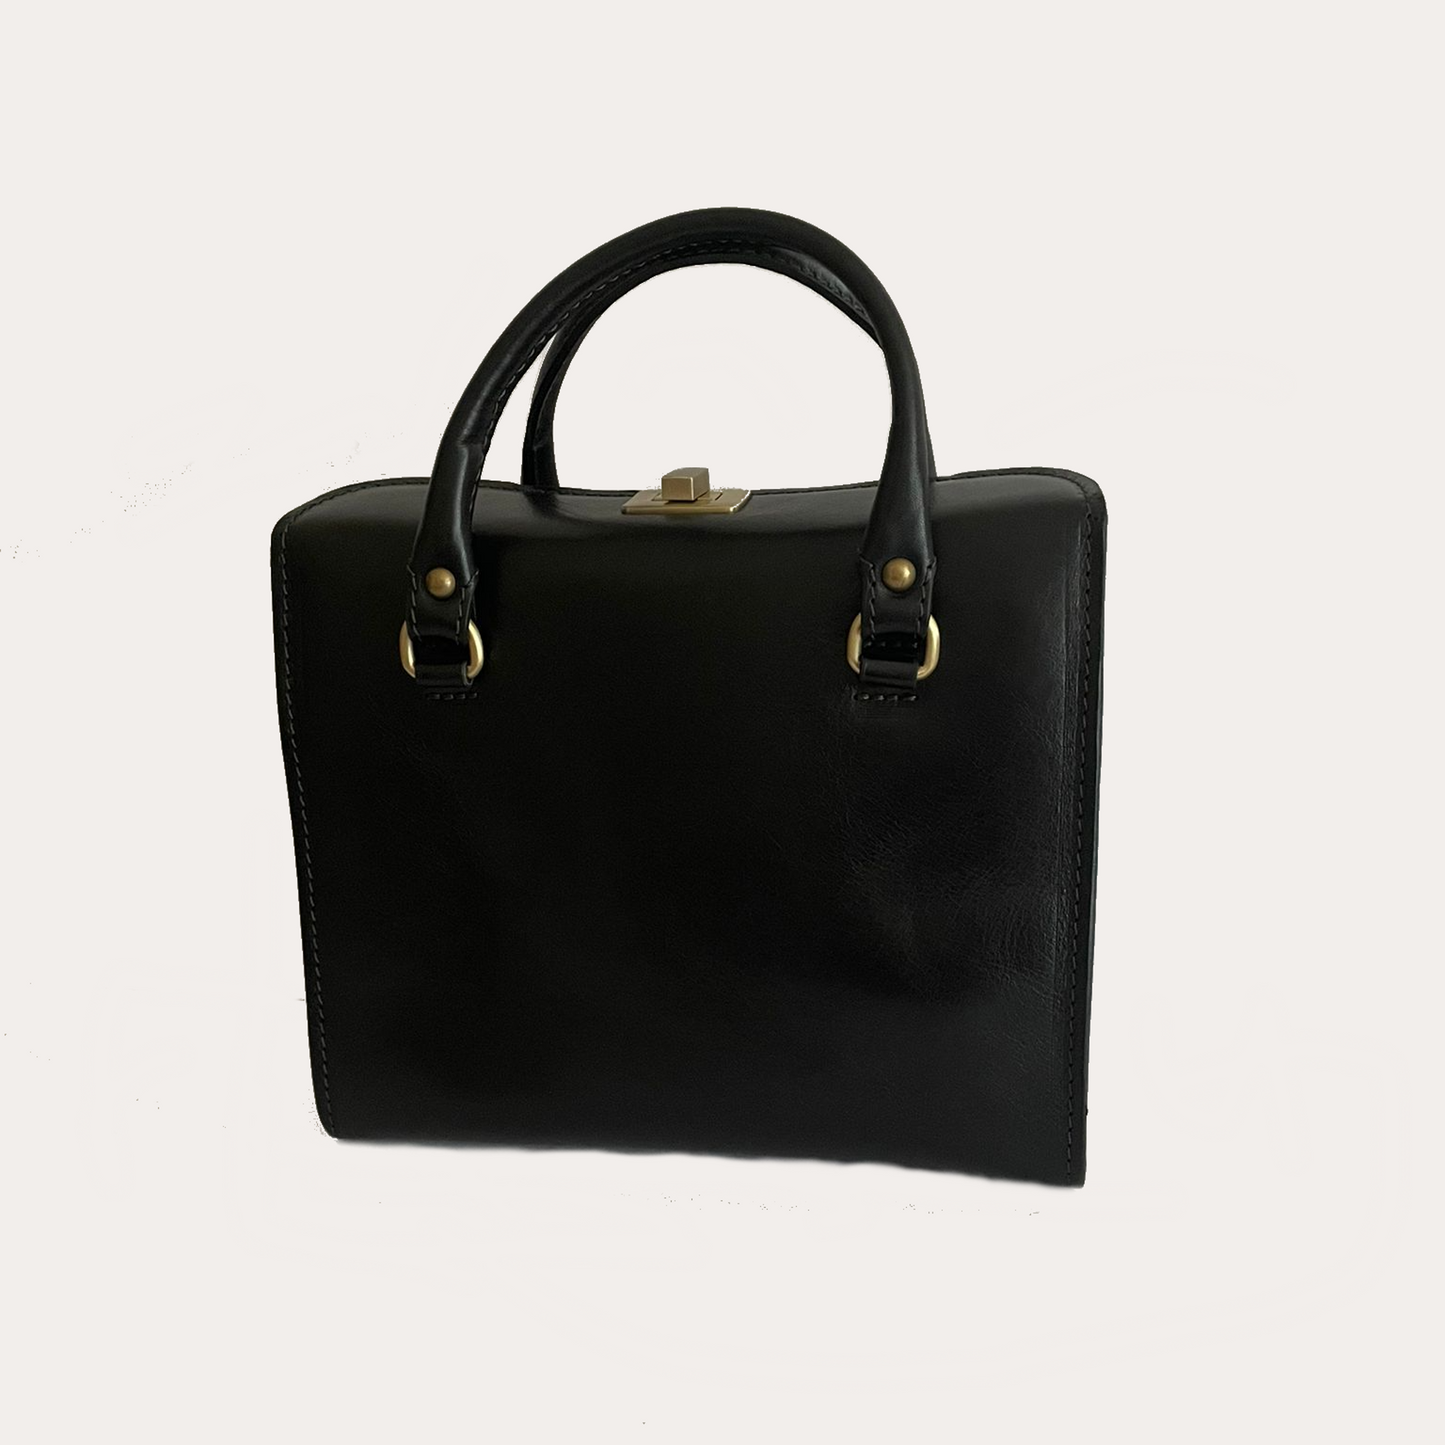 Black Leather Bag with Handles